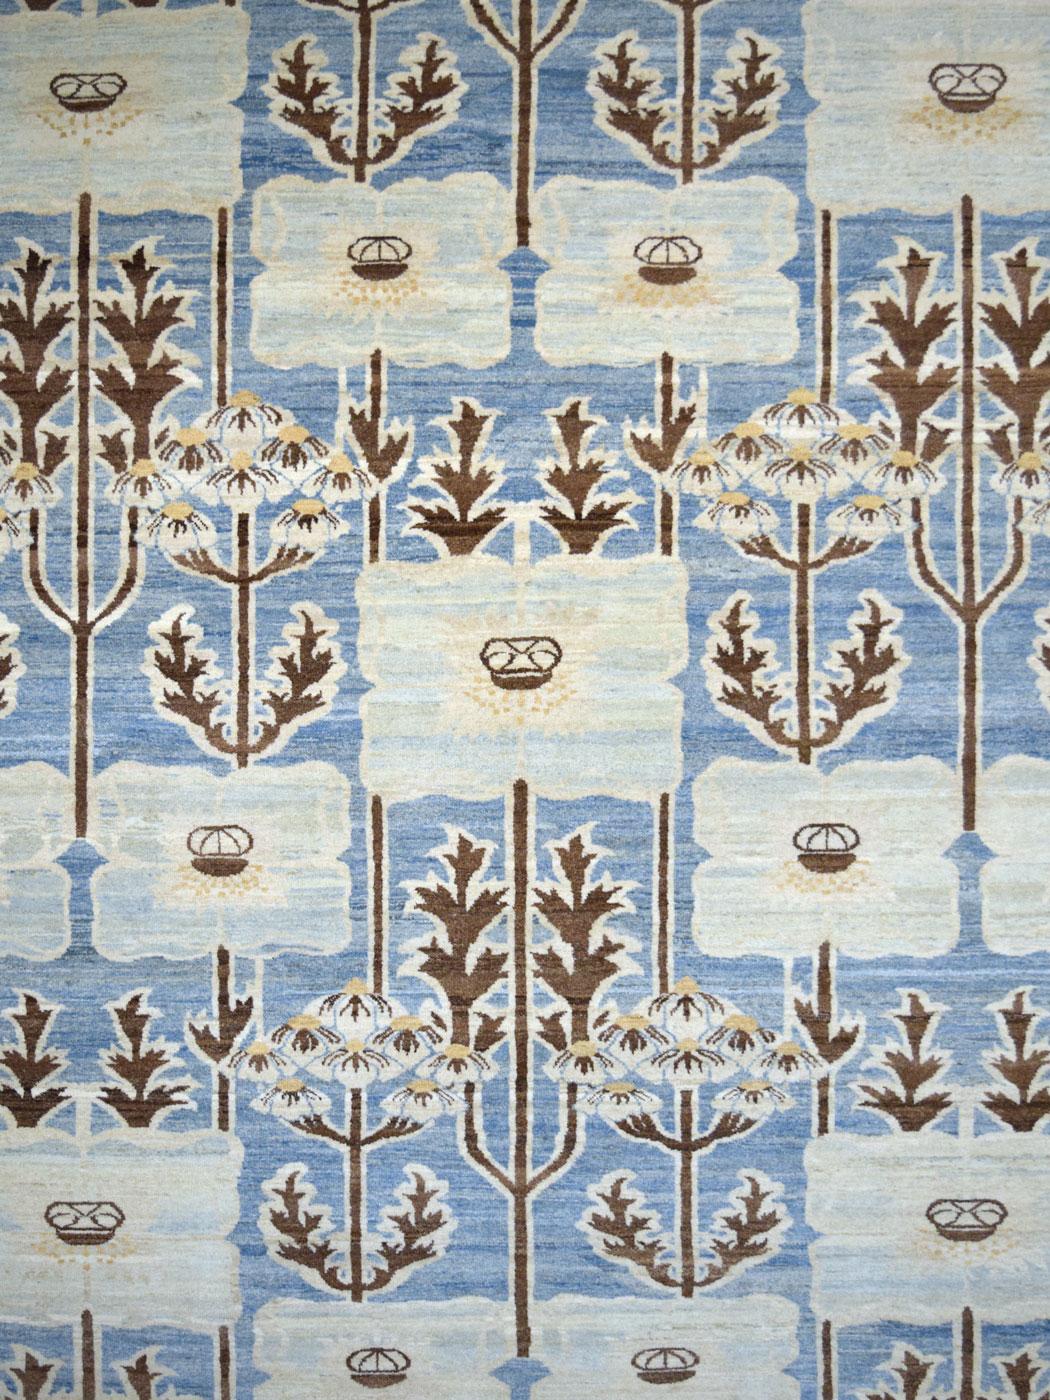 Depicting a lively garden theme, this hand-knotted carpet, titled Magnolia, measures 5'11